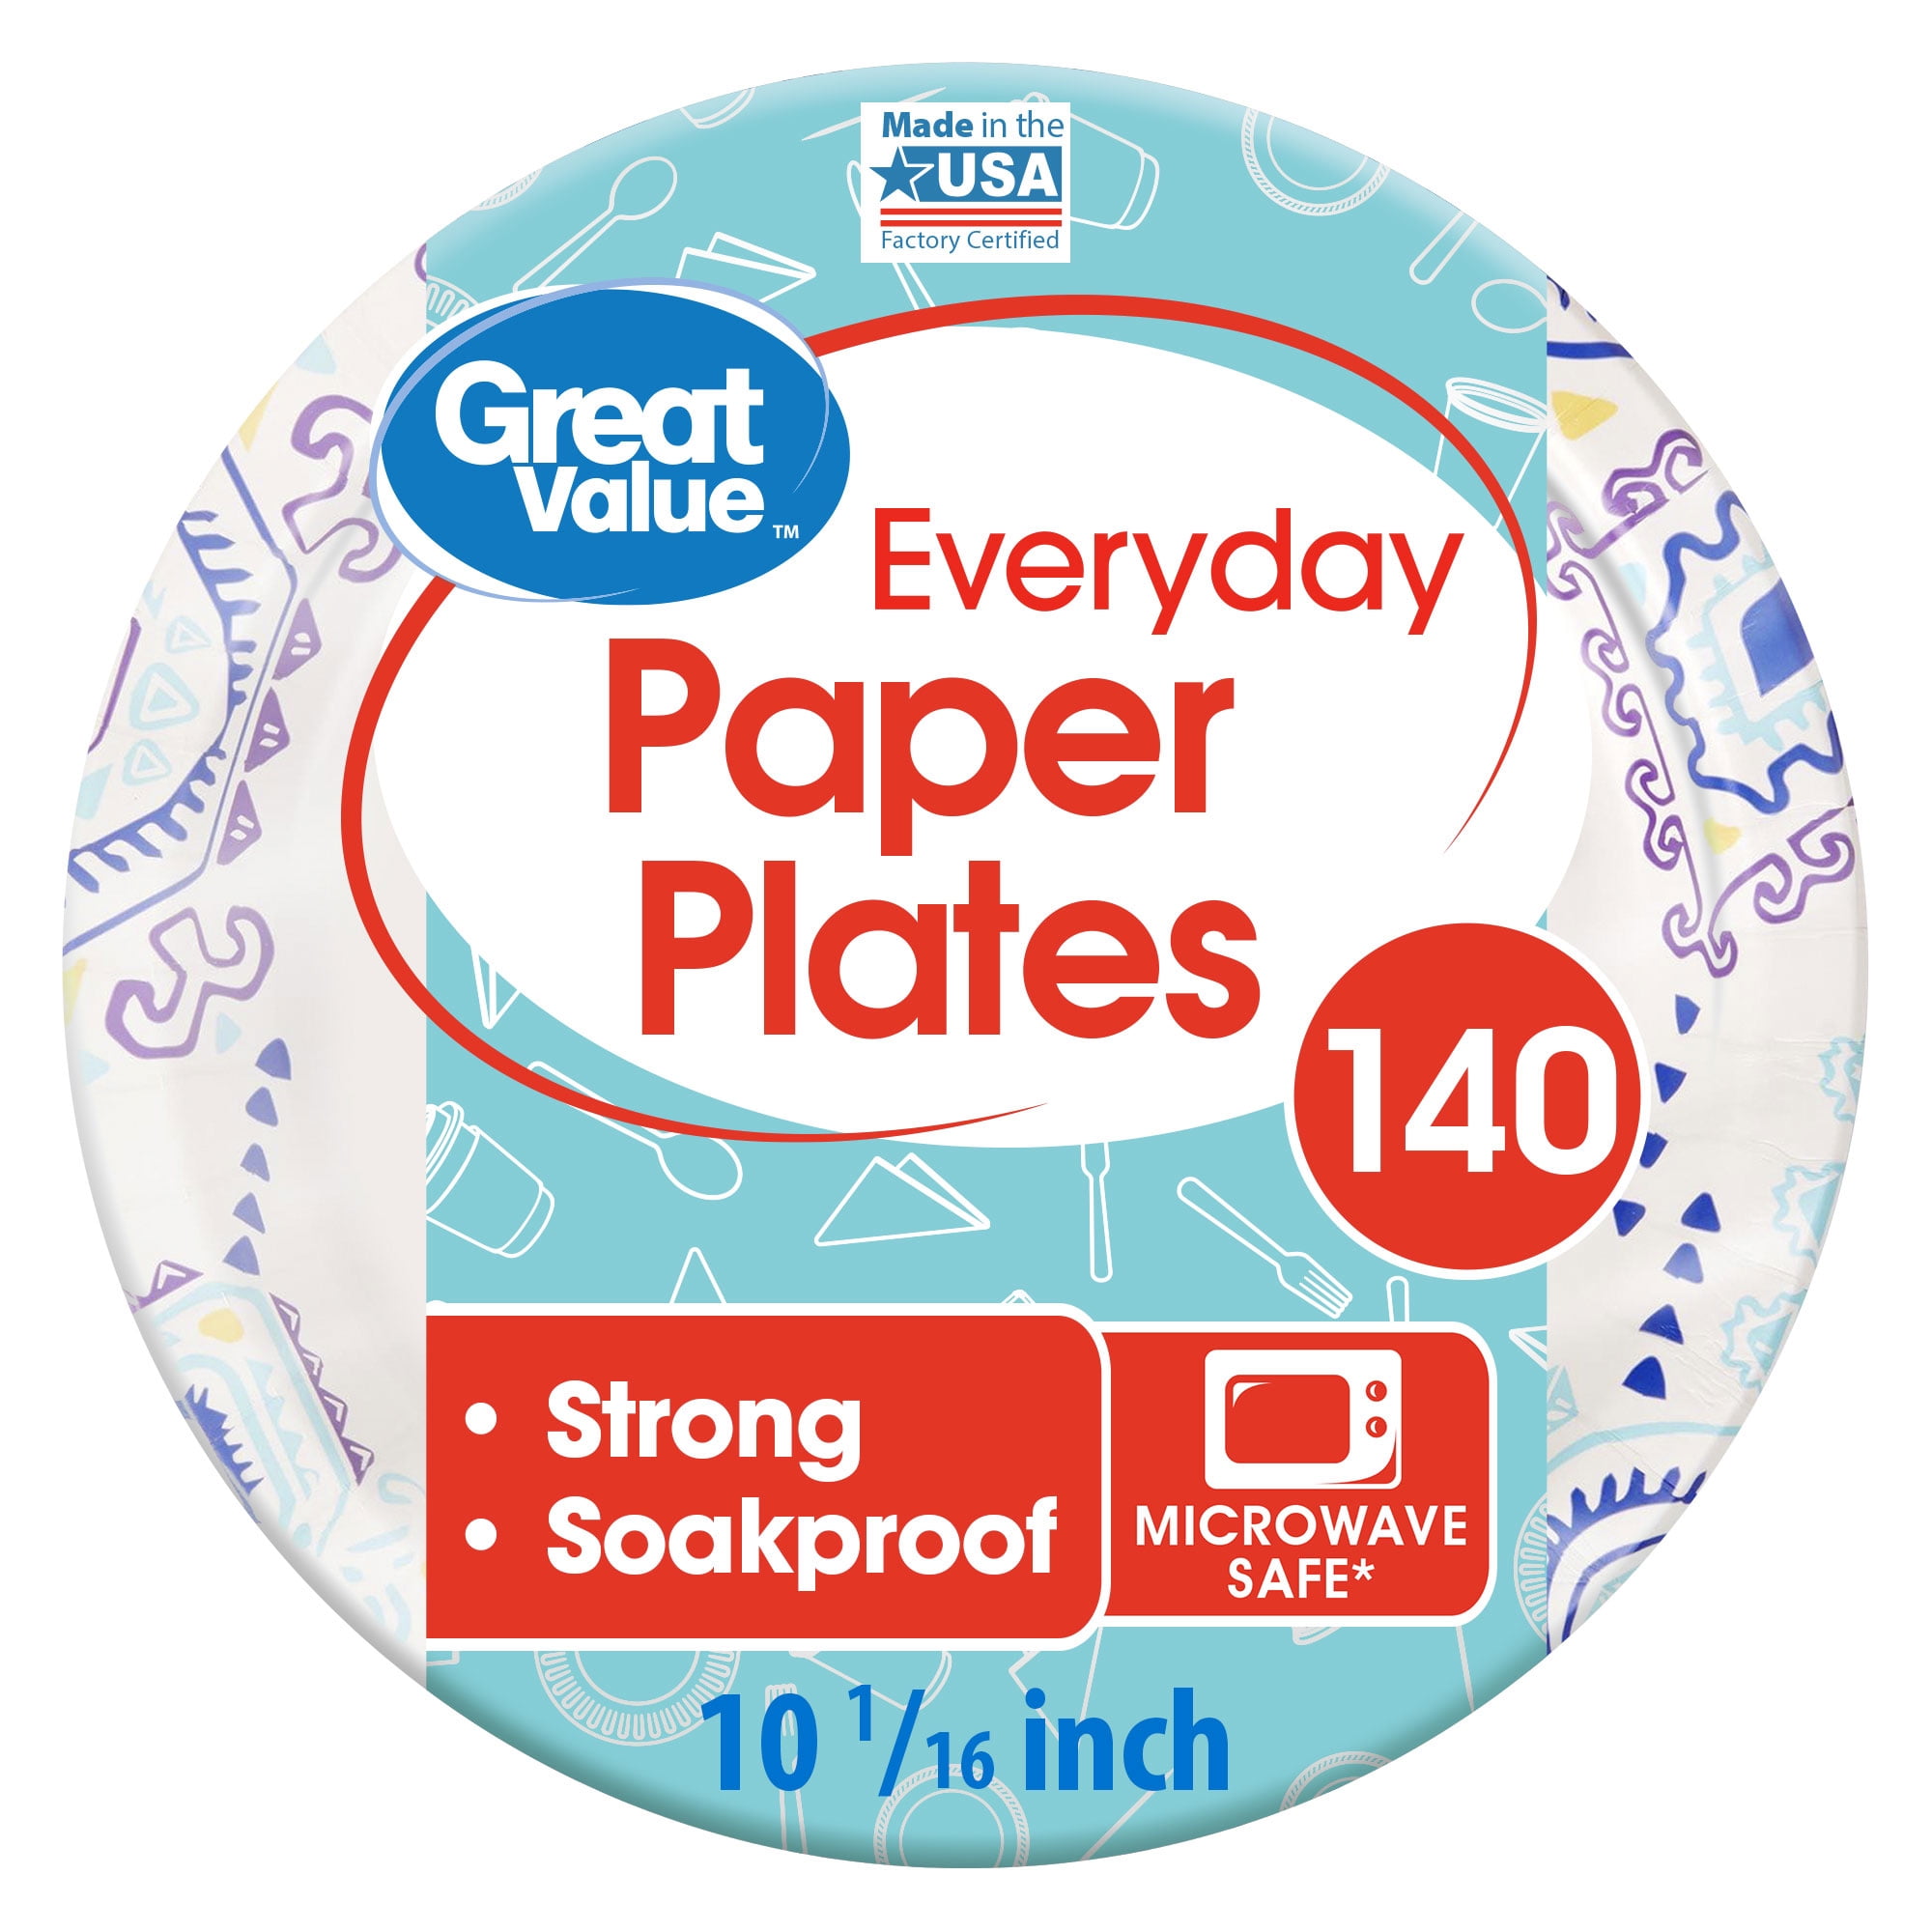 Stock Your Home 9-Inch Paper Plates Uncoated, Everyday Disposable Plates 9  Paper Plate Bulk, White, 500 Count